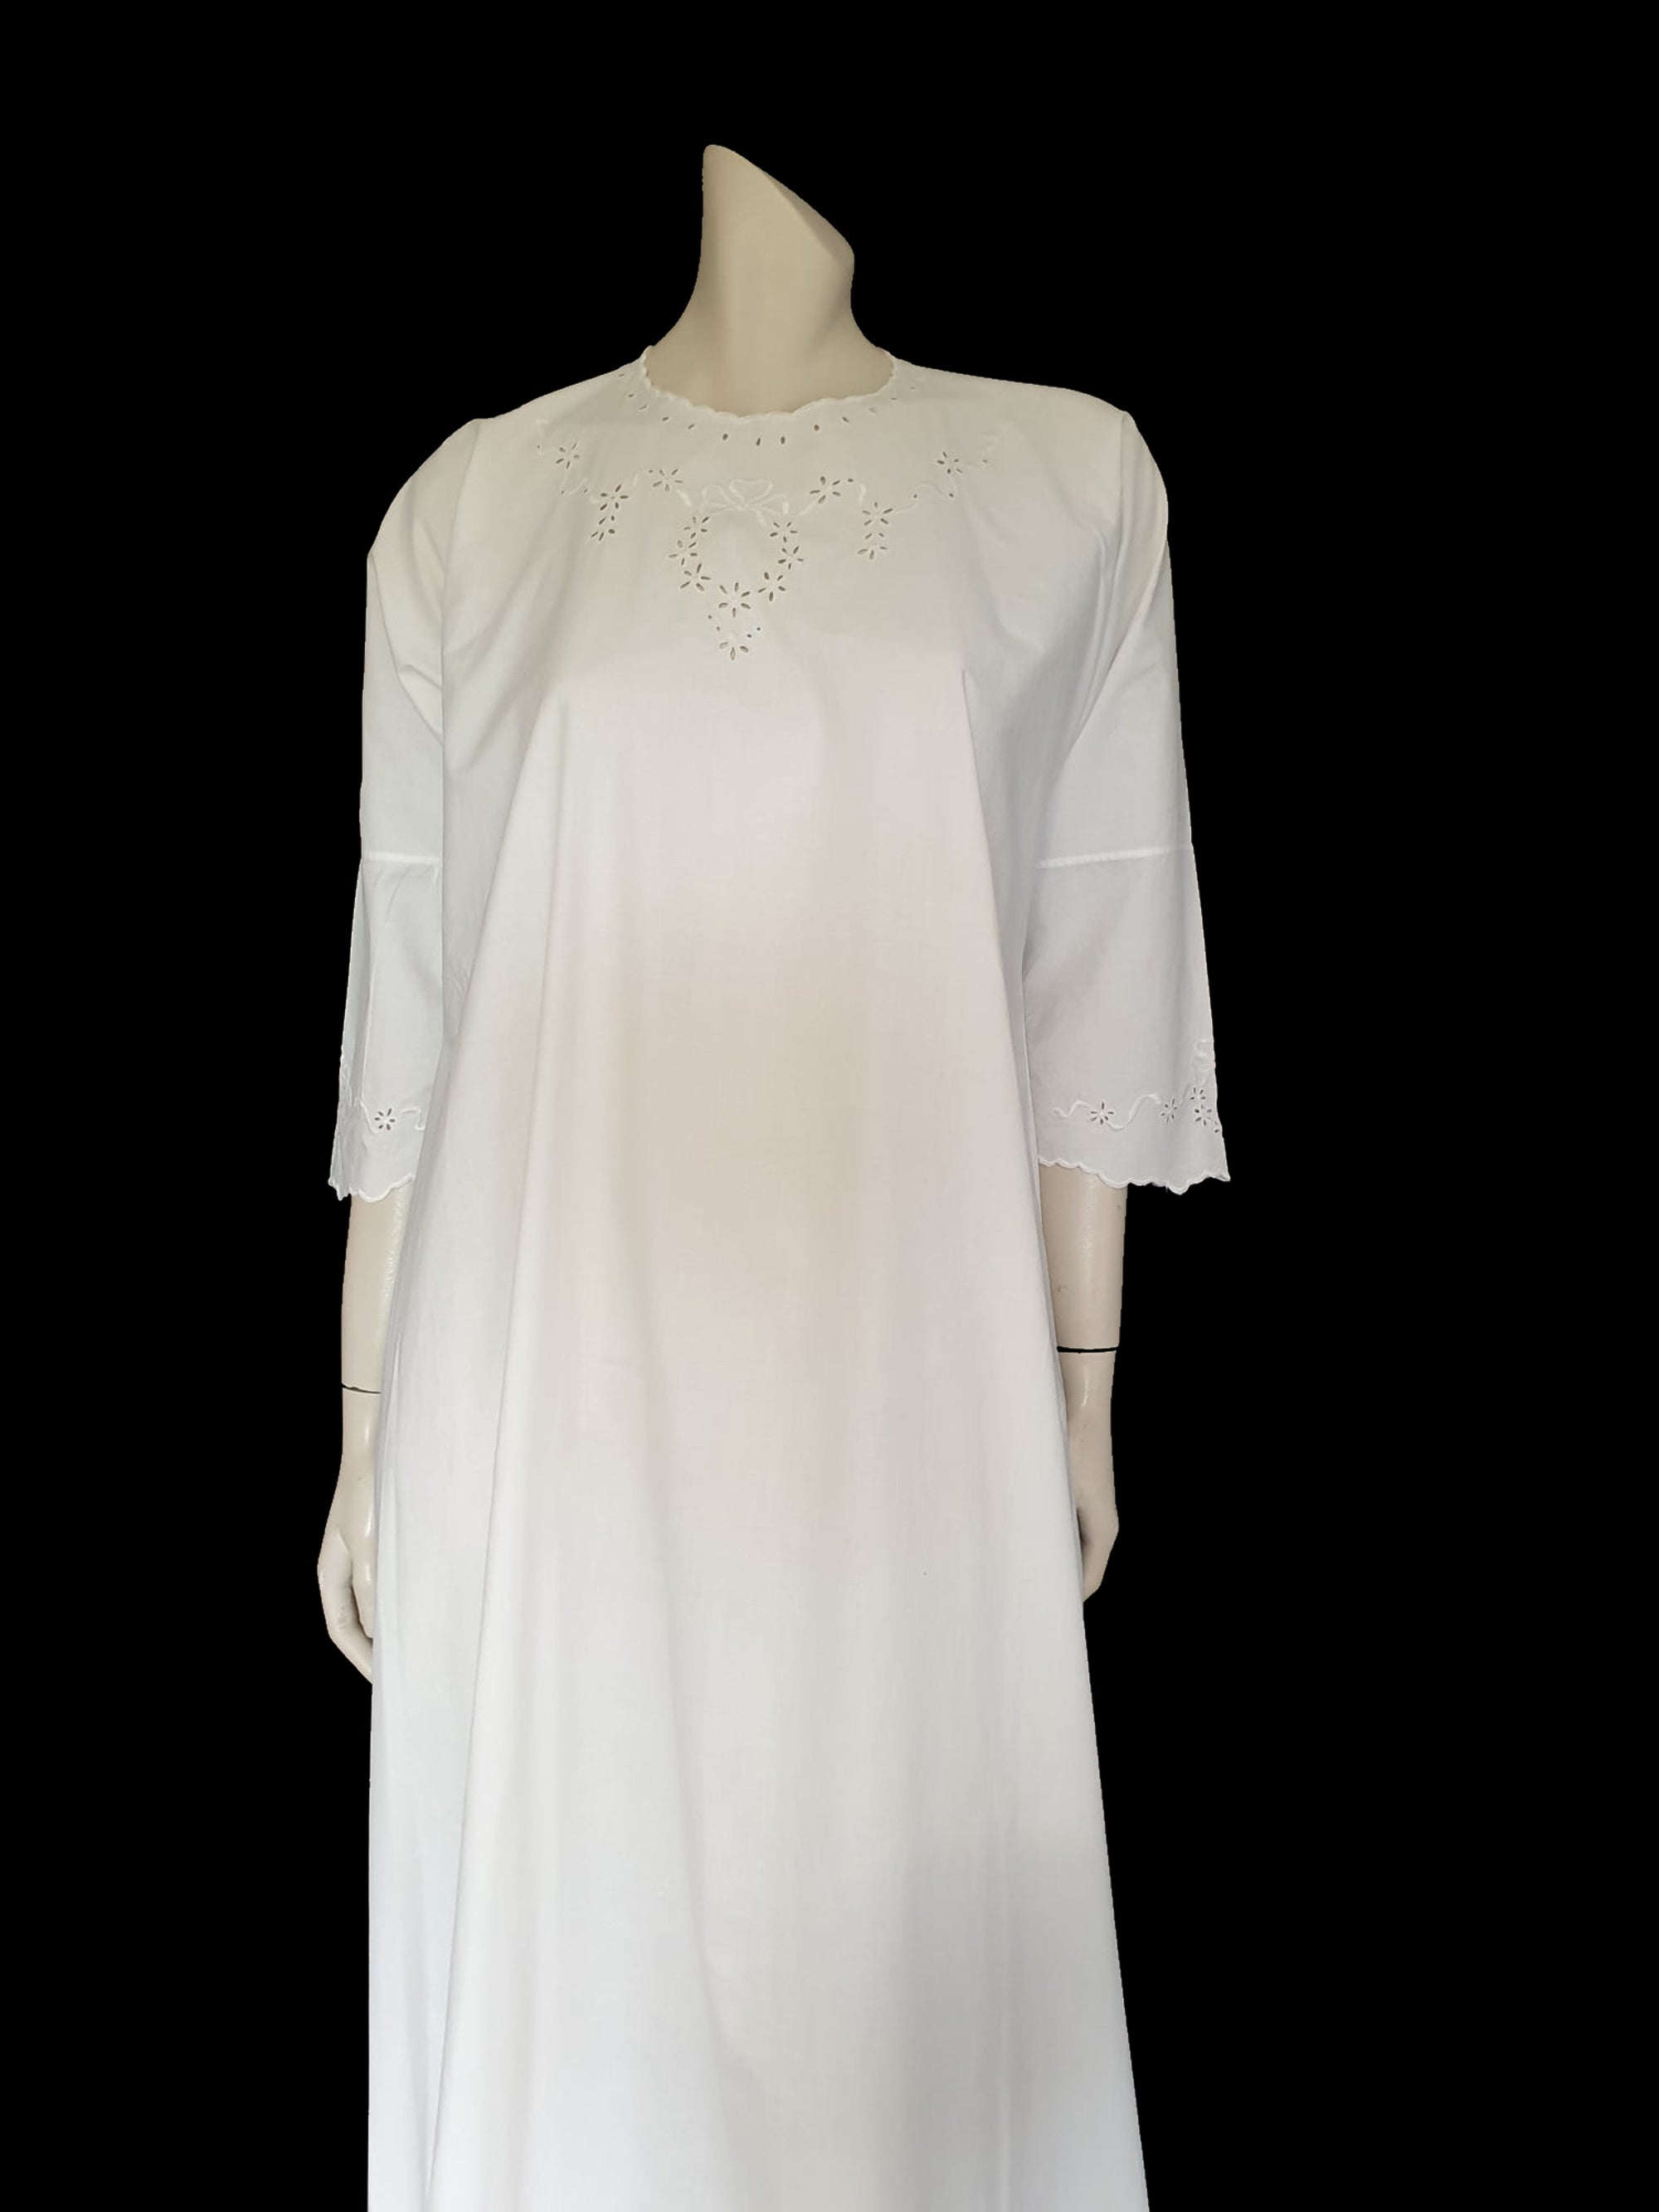 antique edwardian white cotton nightgown with eyelet work or broderie anglaise Medium